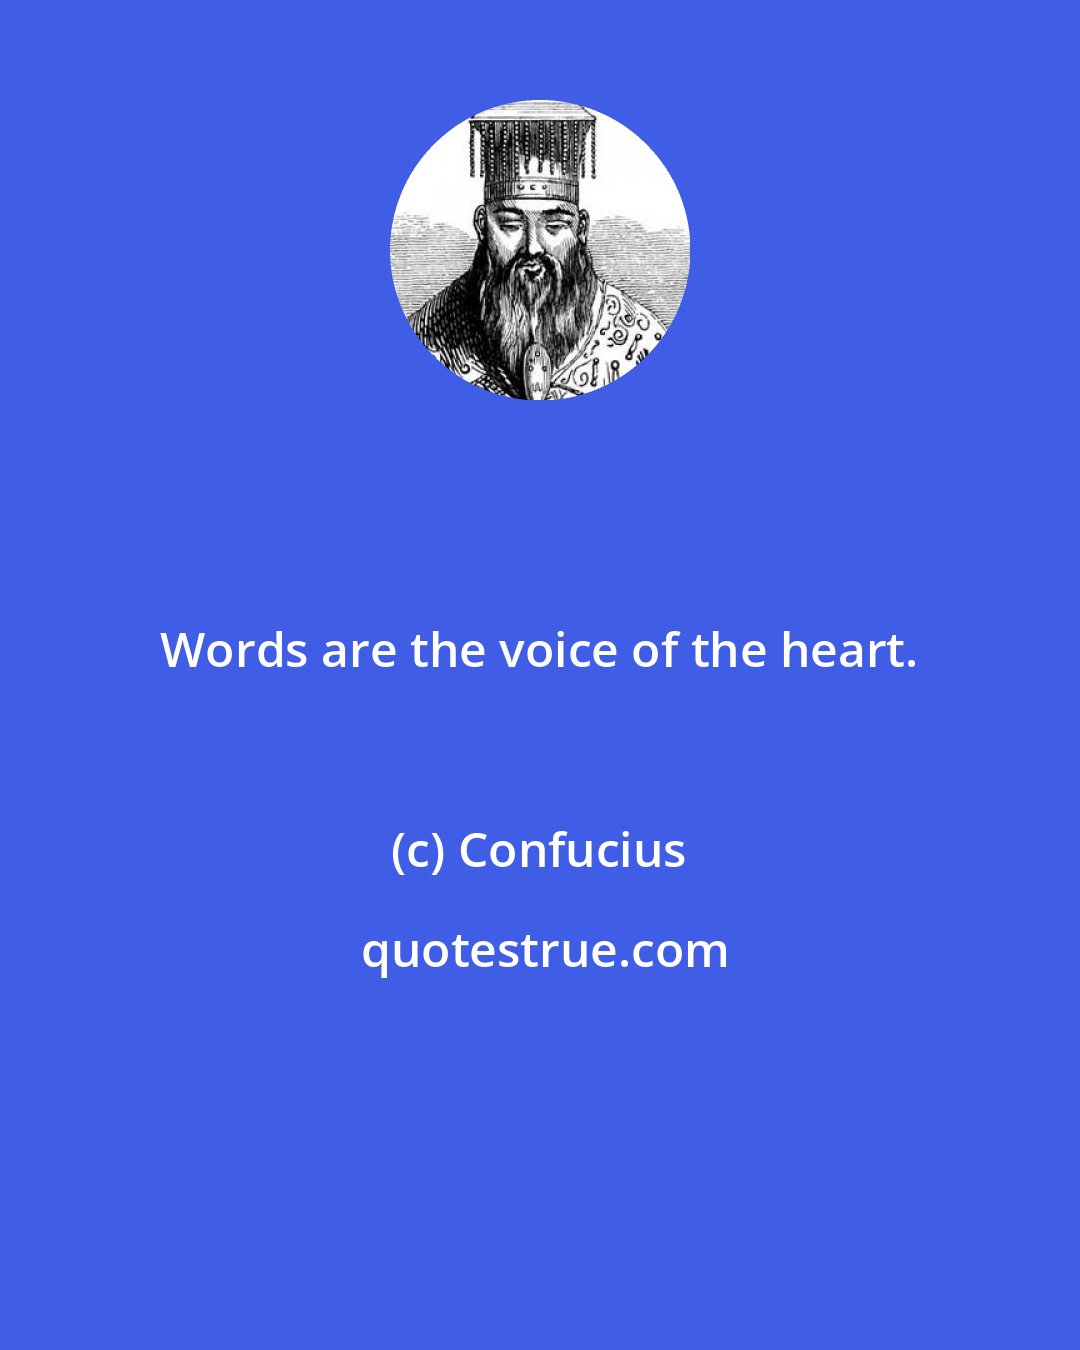 Confucius: Words are the voice of the heart.